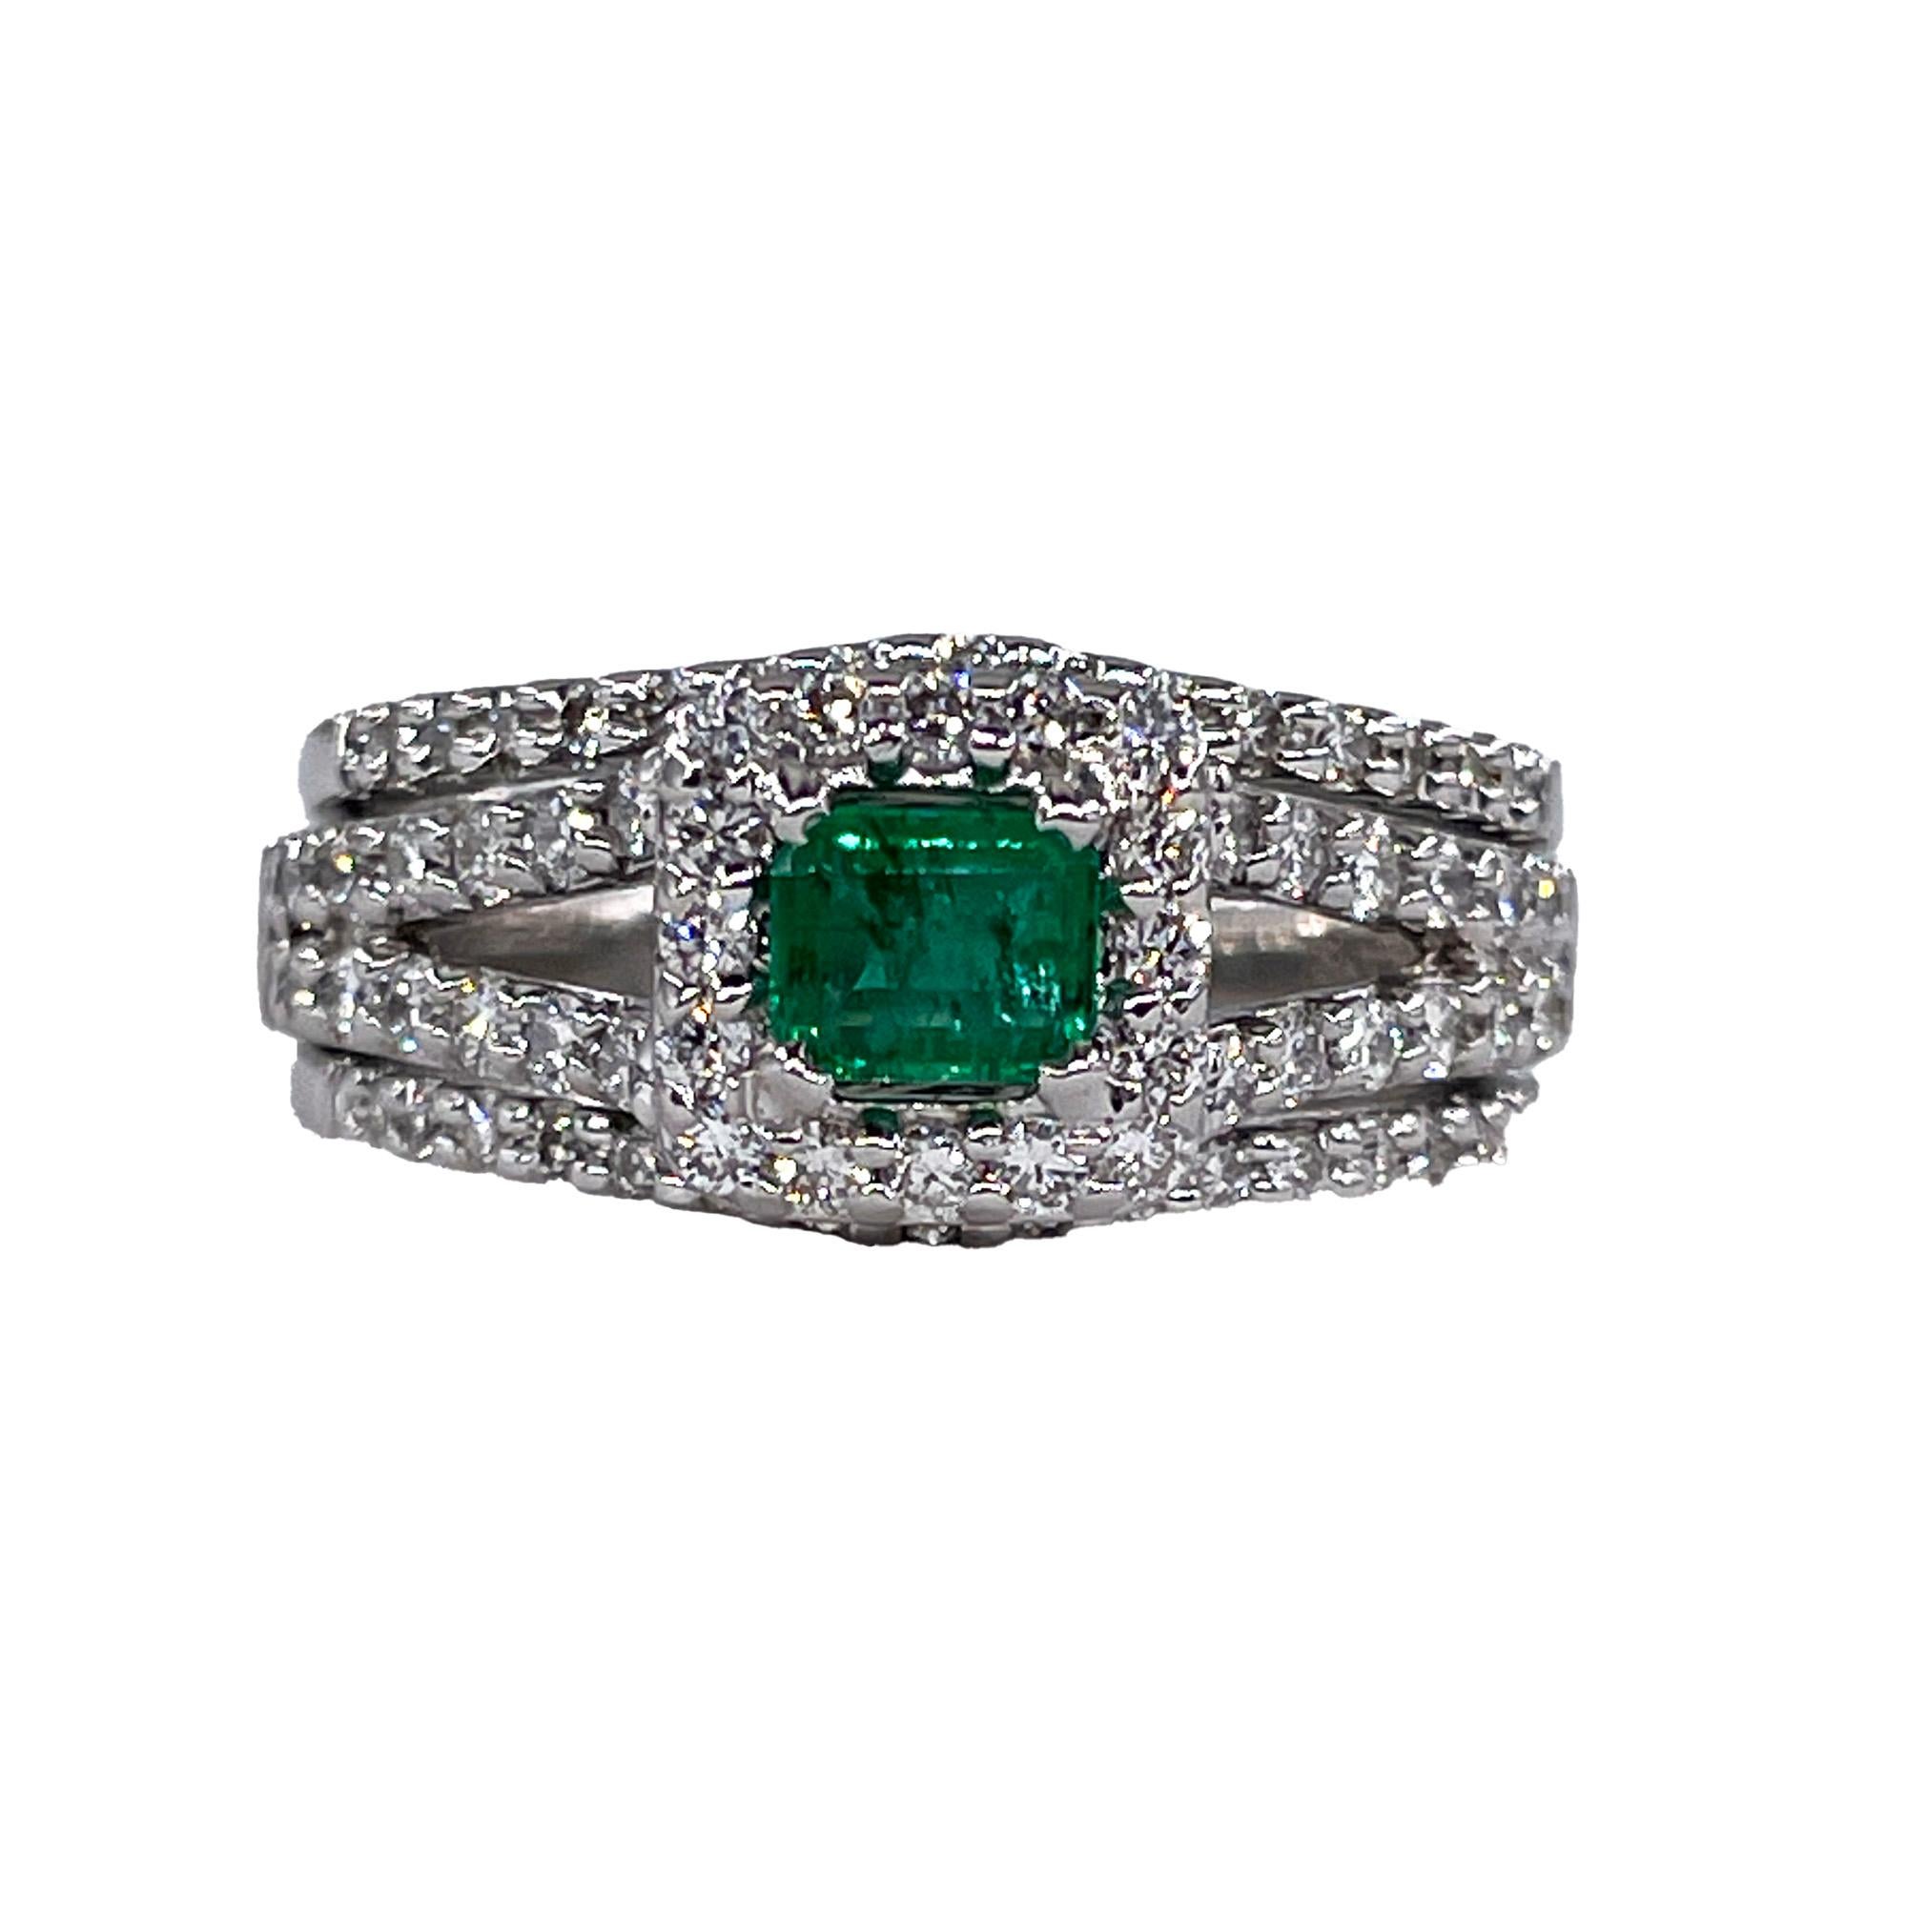 Emerald Cut Estate 1.70ct Natural Green Emerald & Diamond Triple Band Gold Ring by Heizberg For Sale